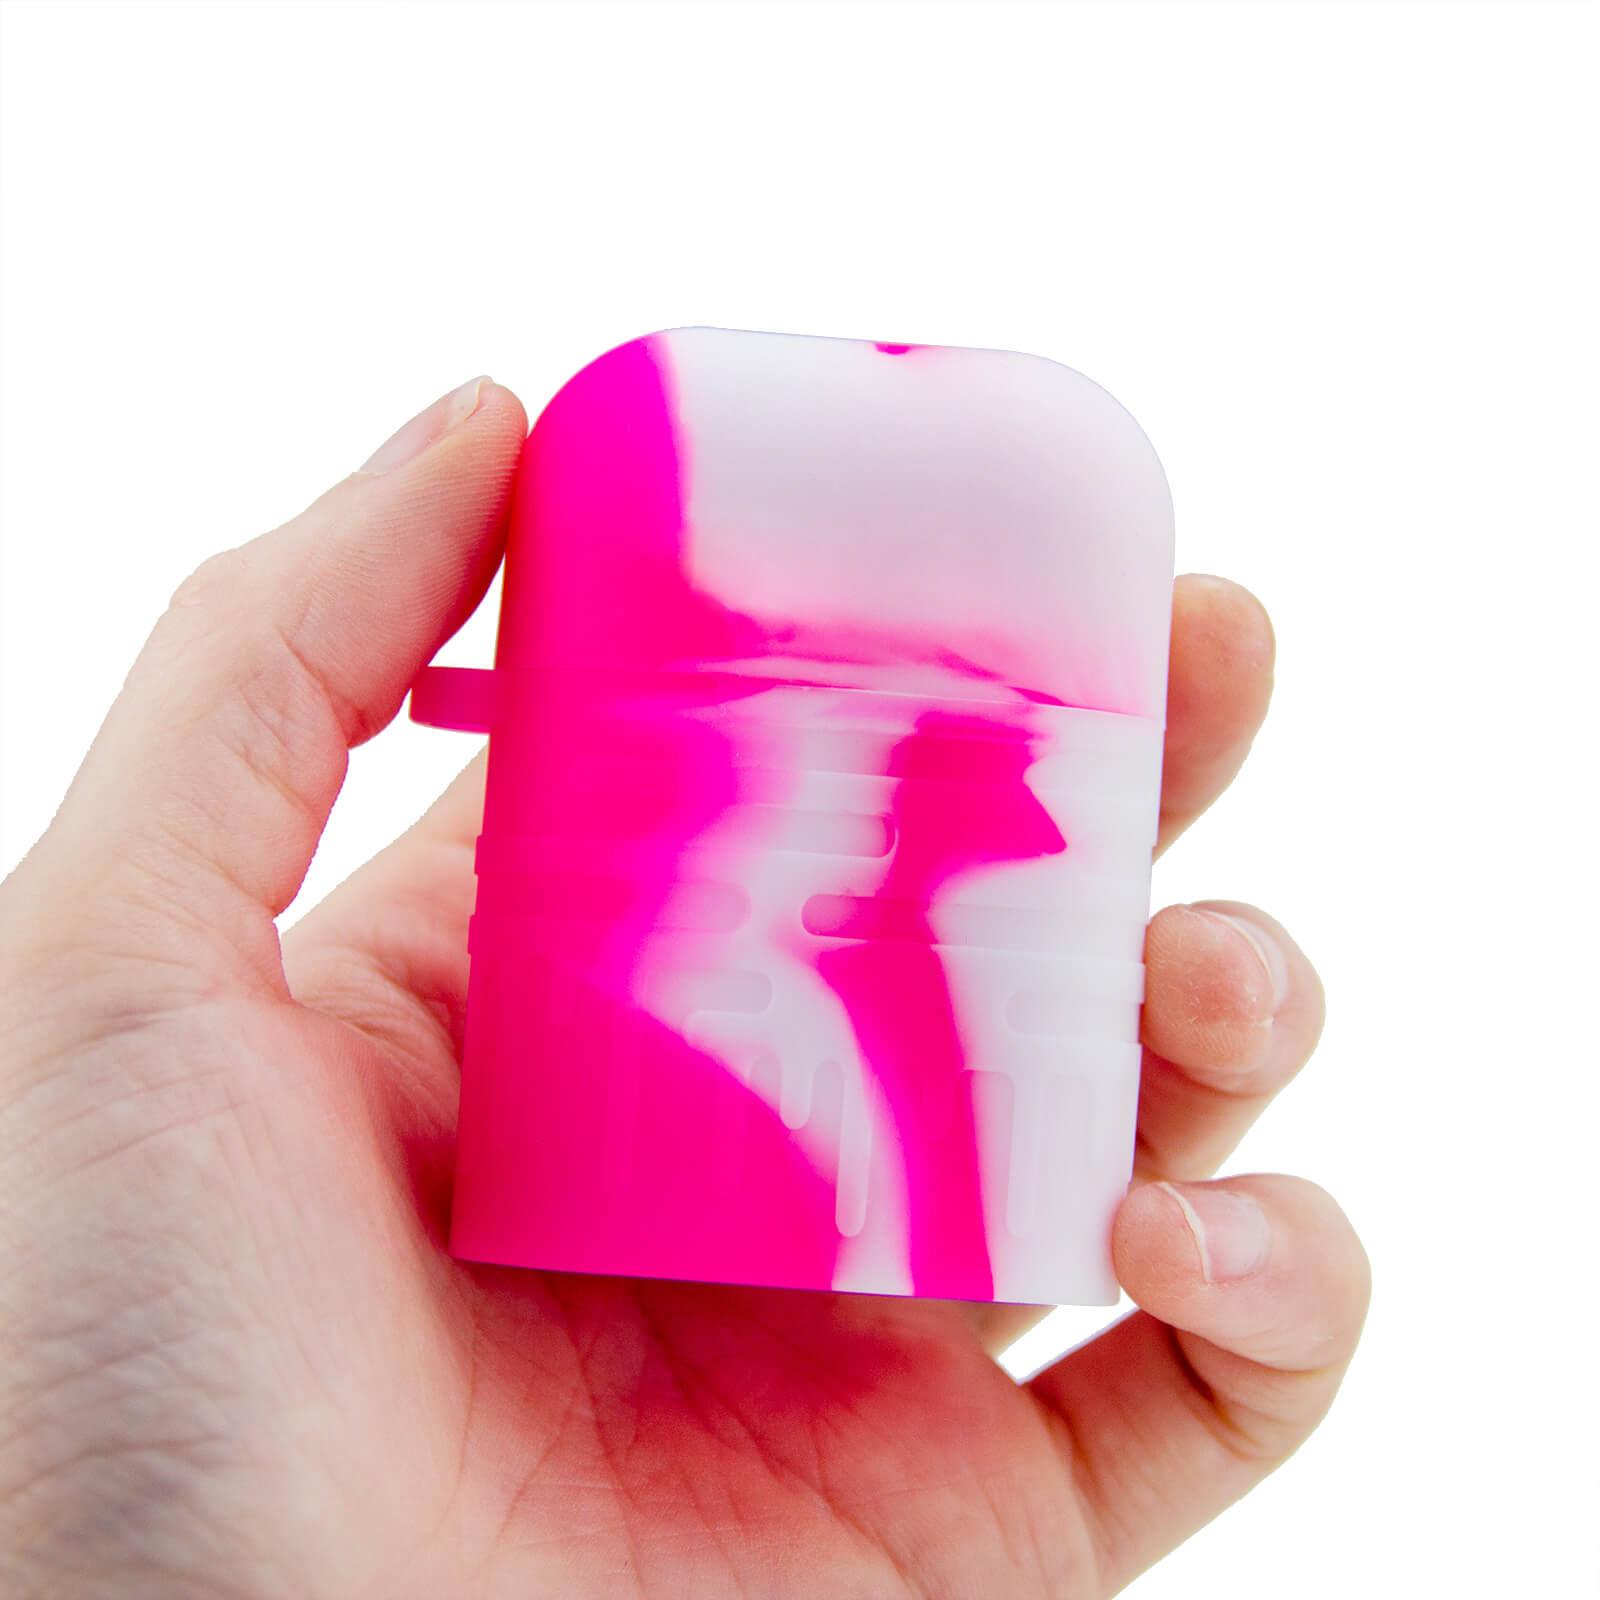 Silicone Dugout One Hitter Set Pink